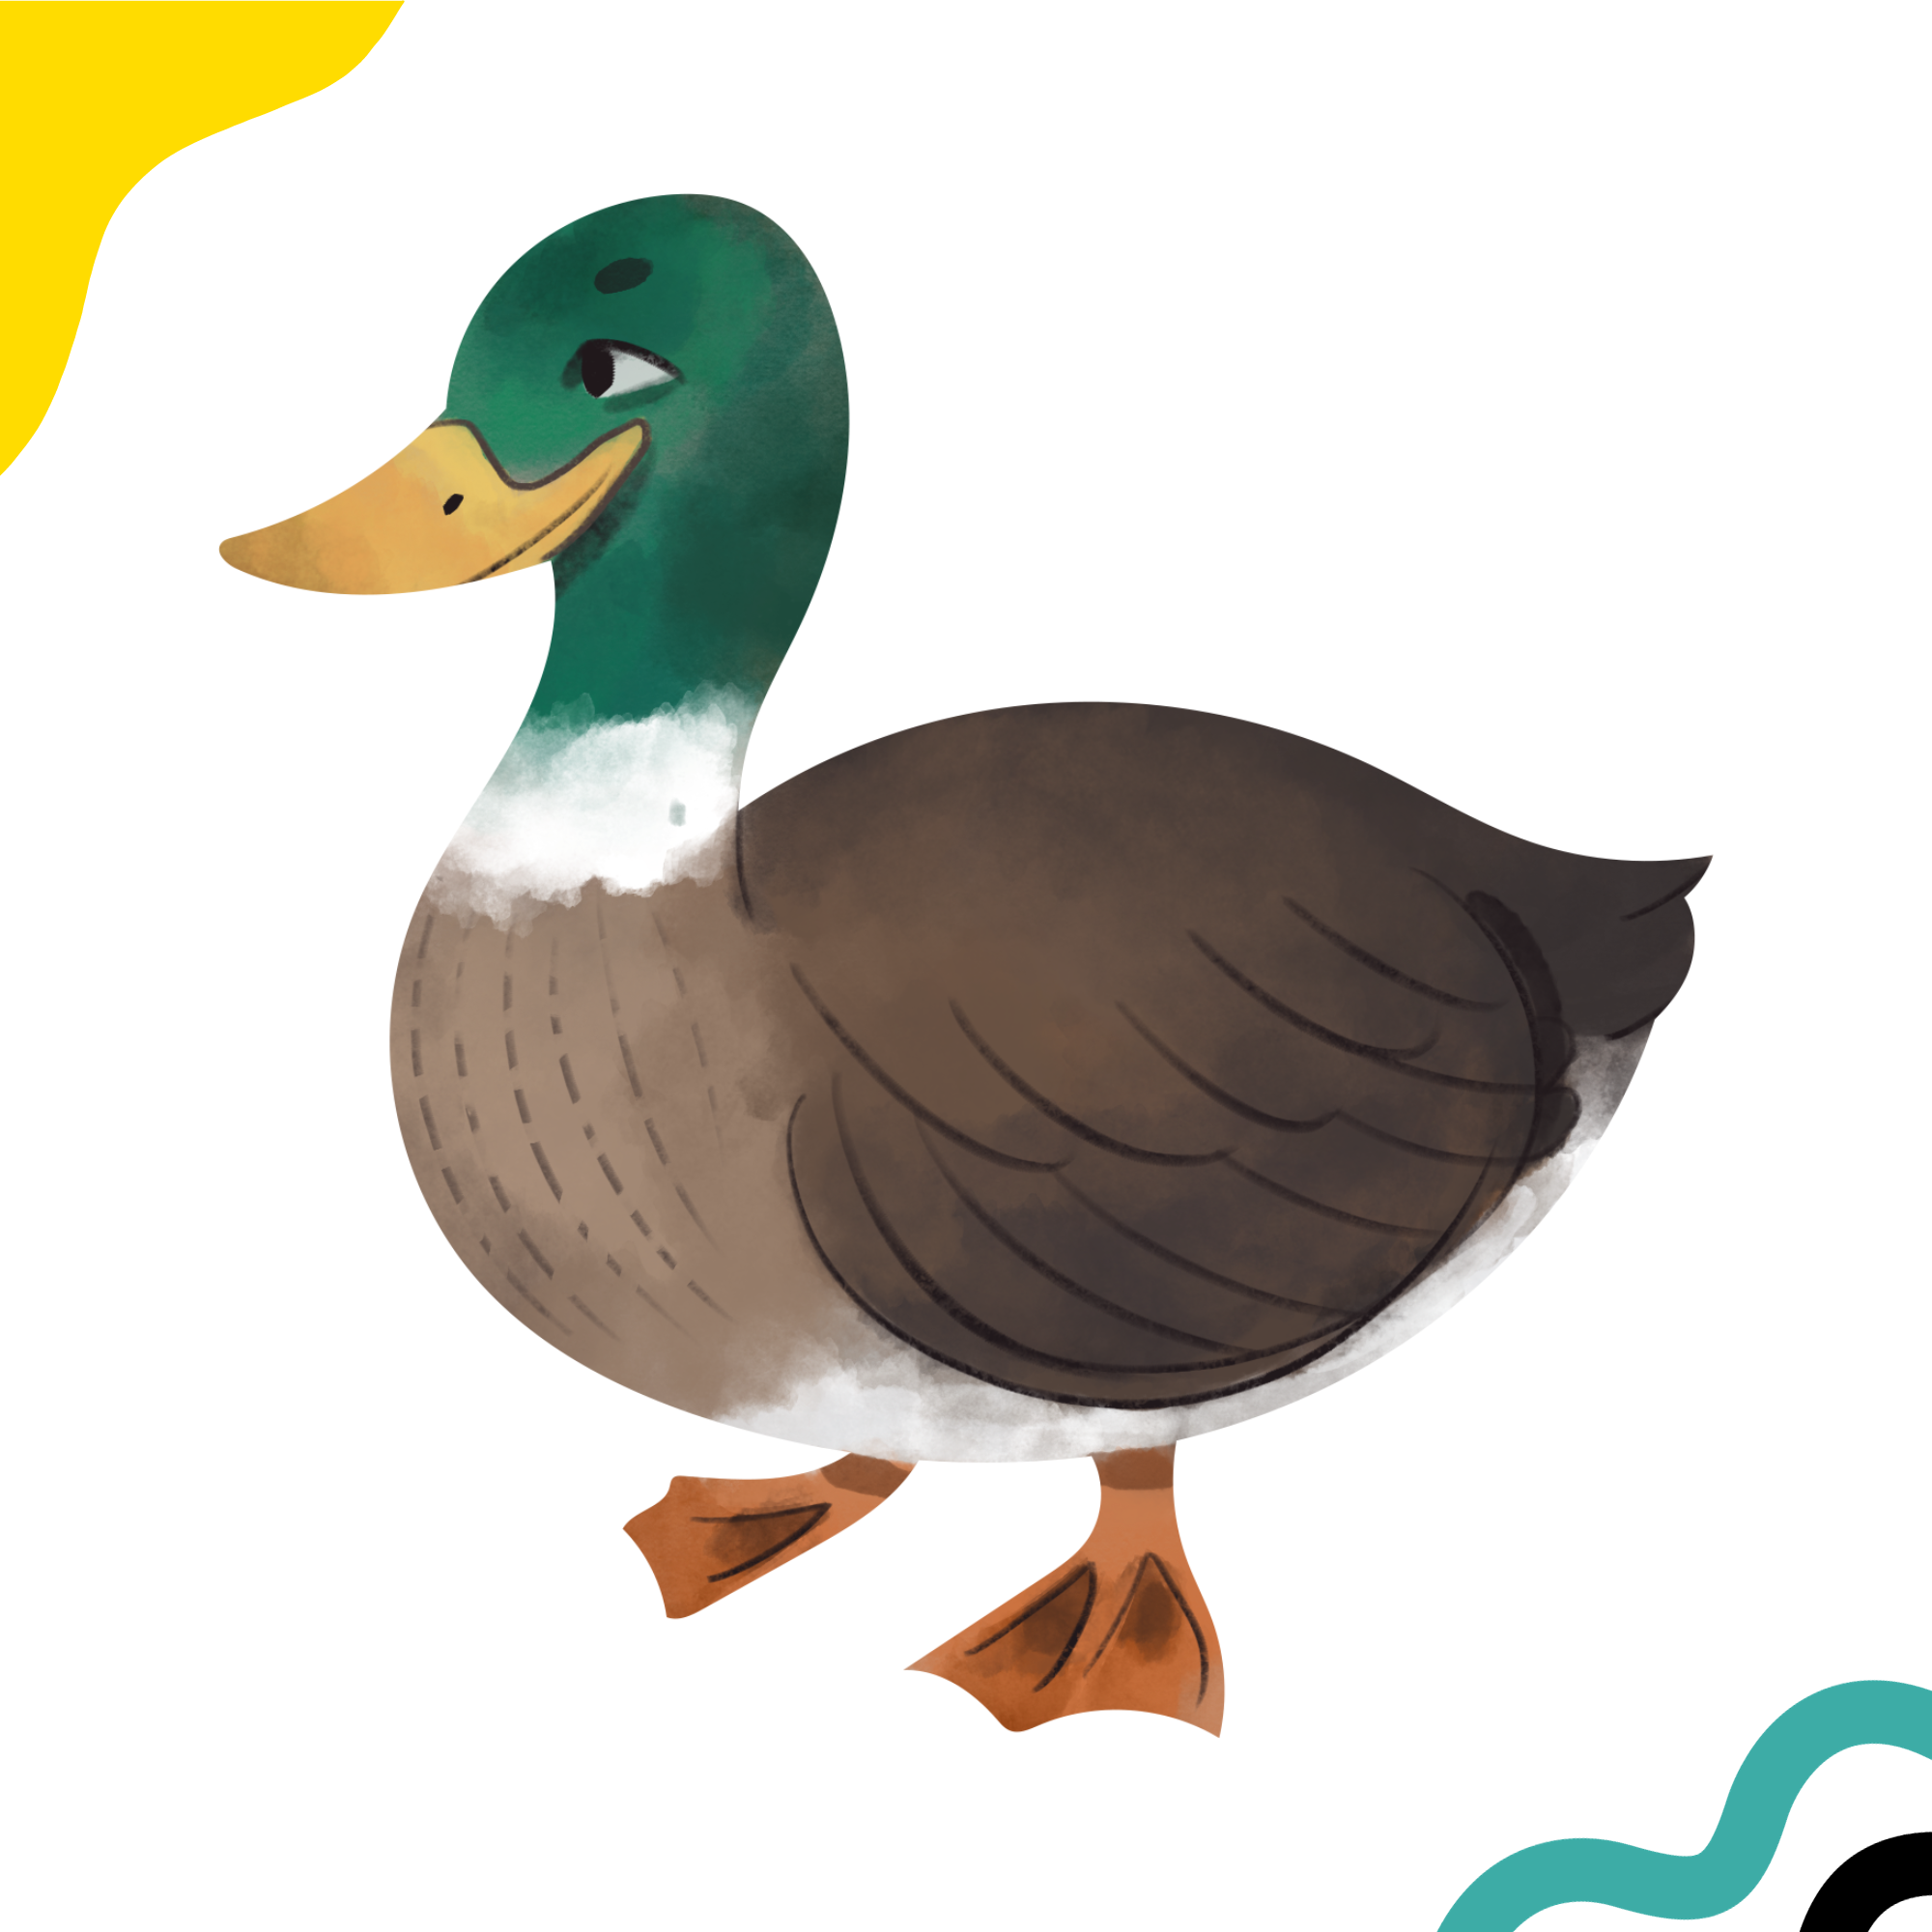 Visual presentation of a duck, source of dog food